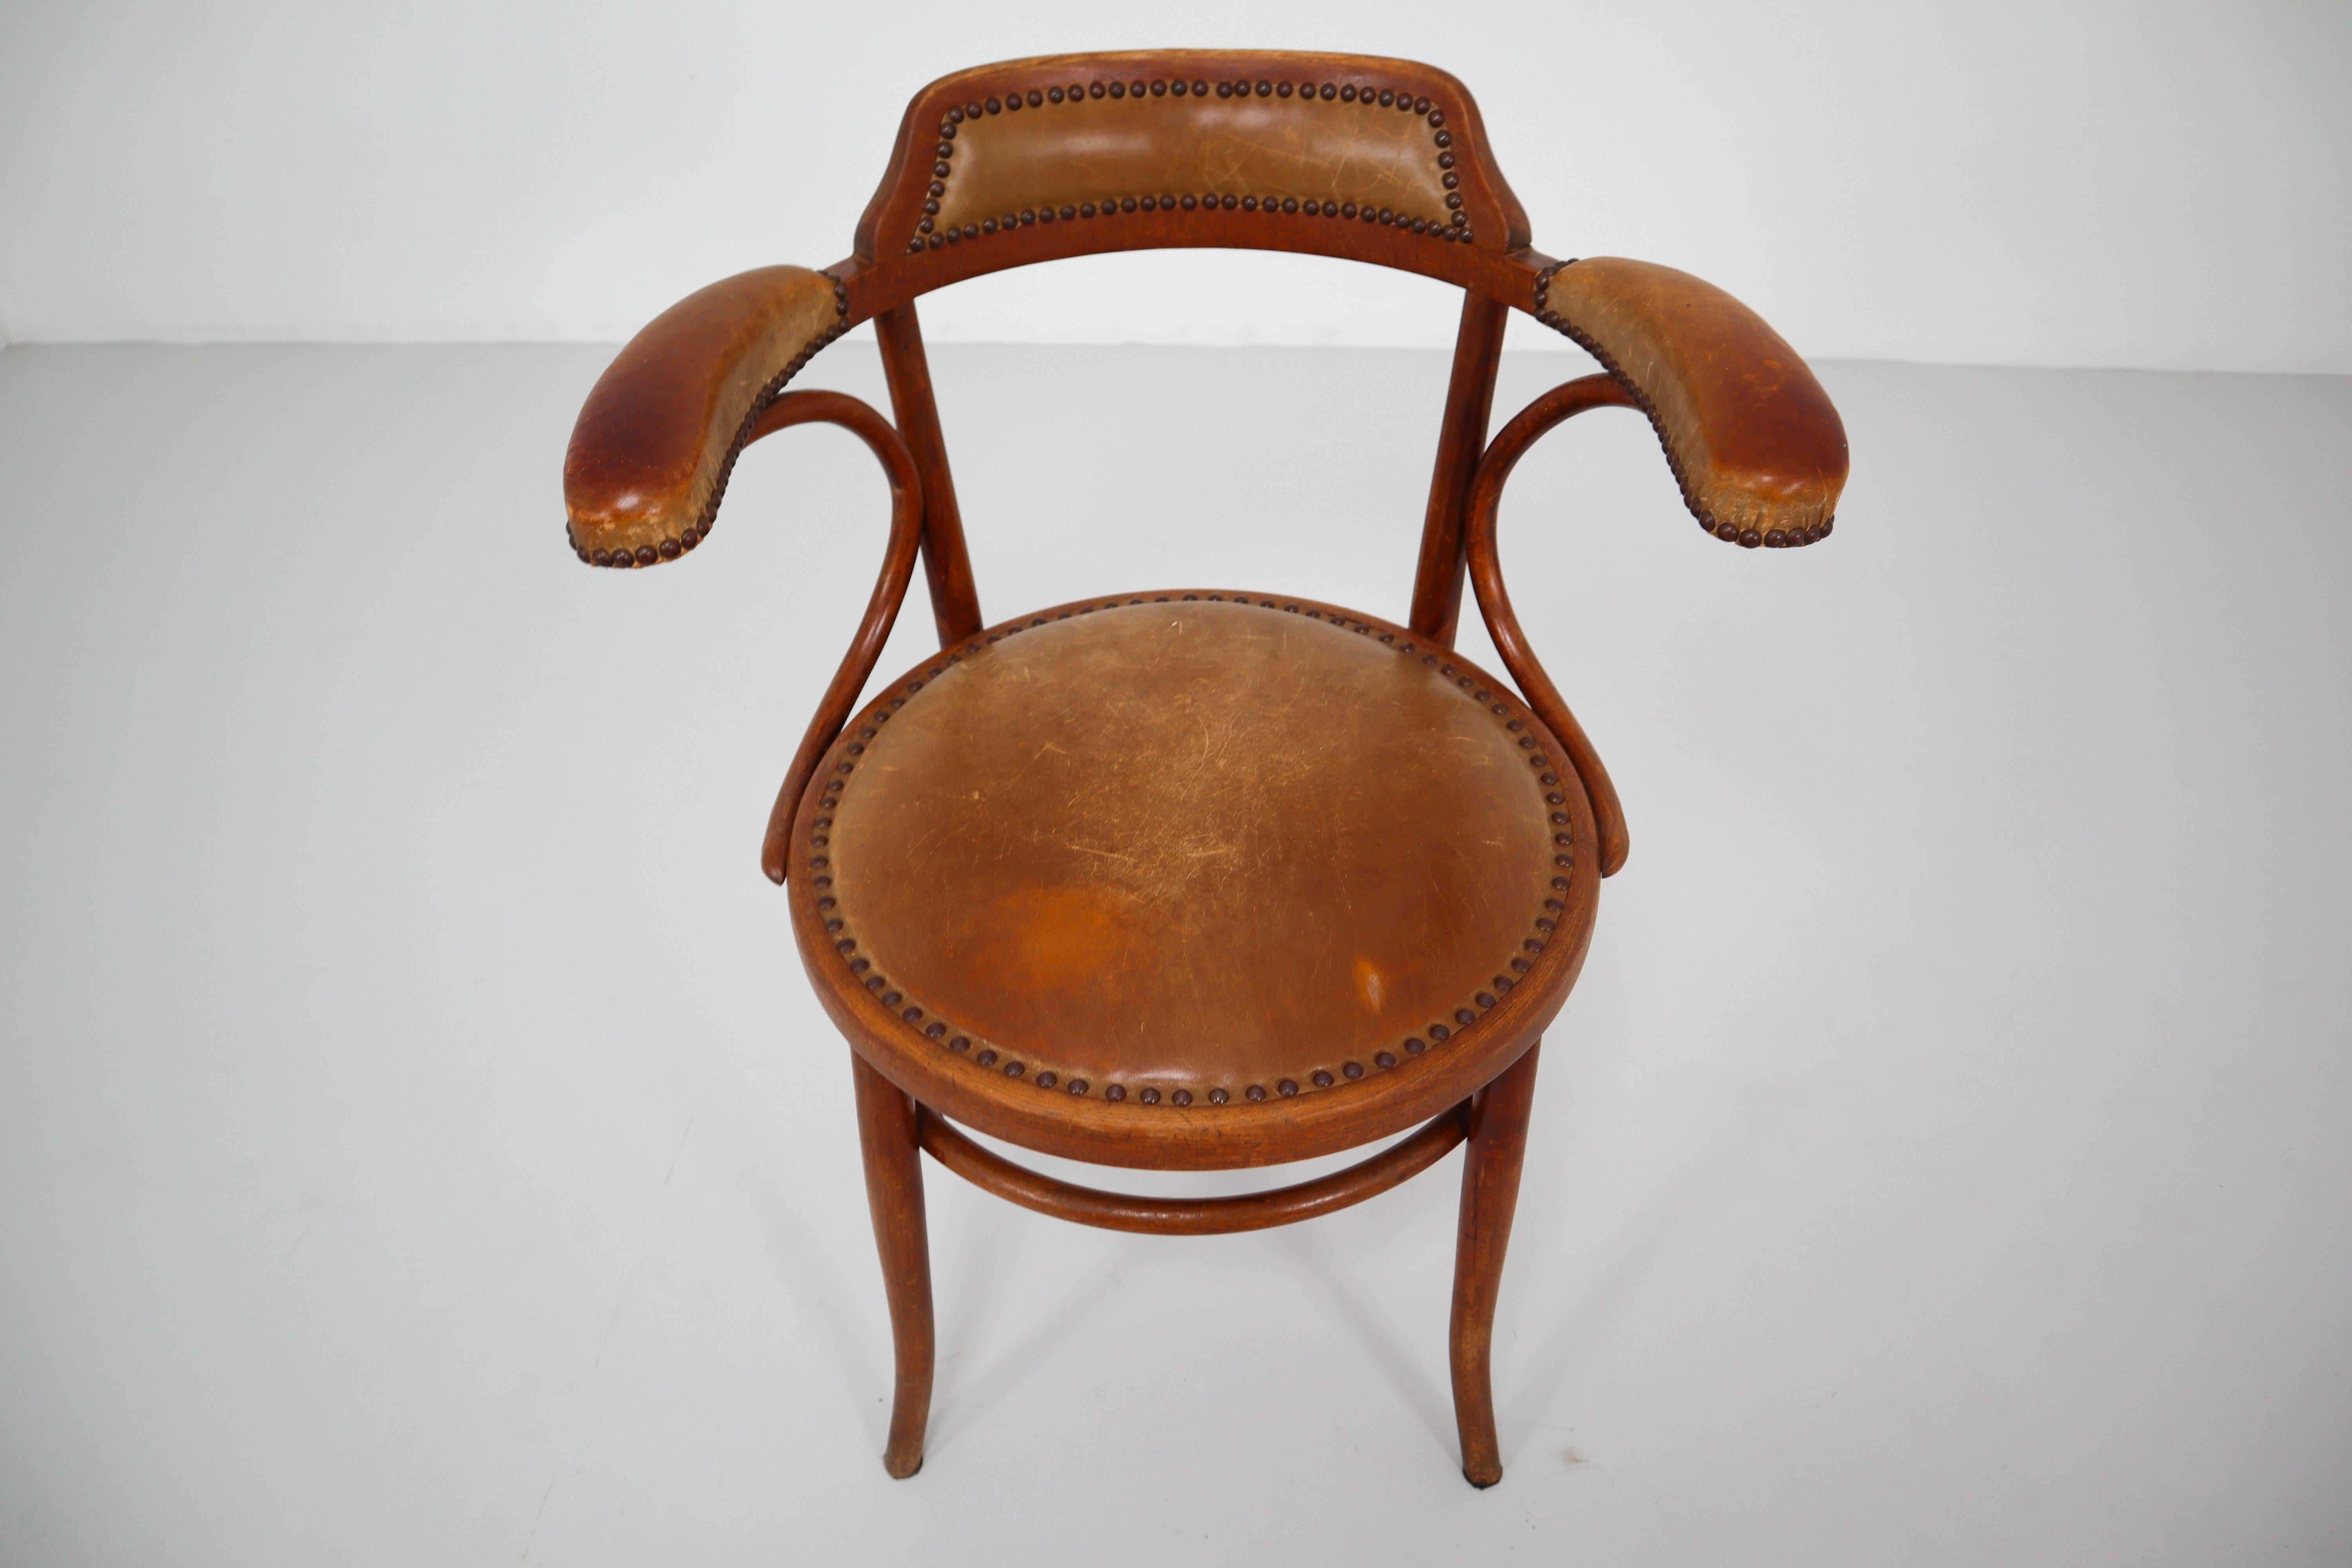 Austrian Thonet Bentwood Armchair with Patinated Leather Seat and Armrest, Vienna Austria